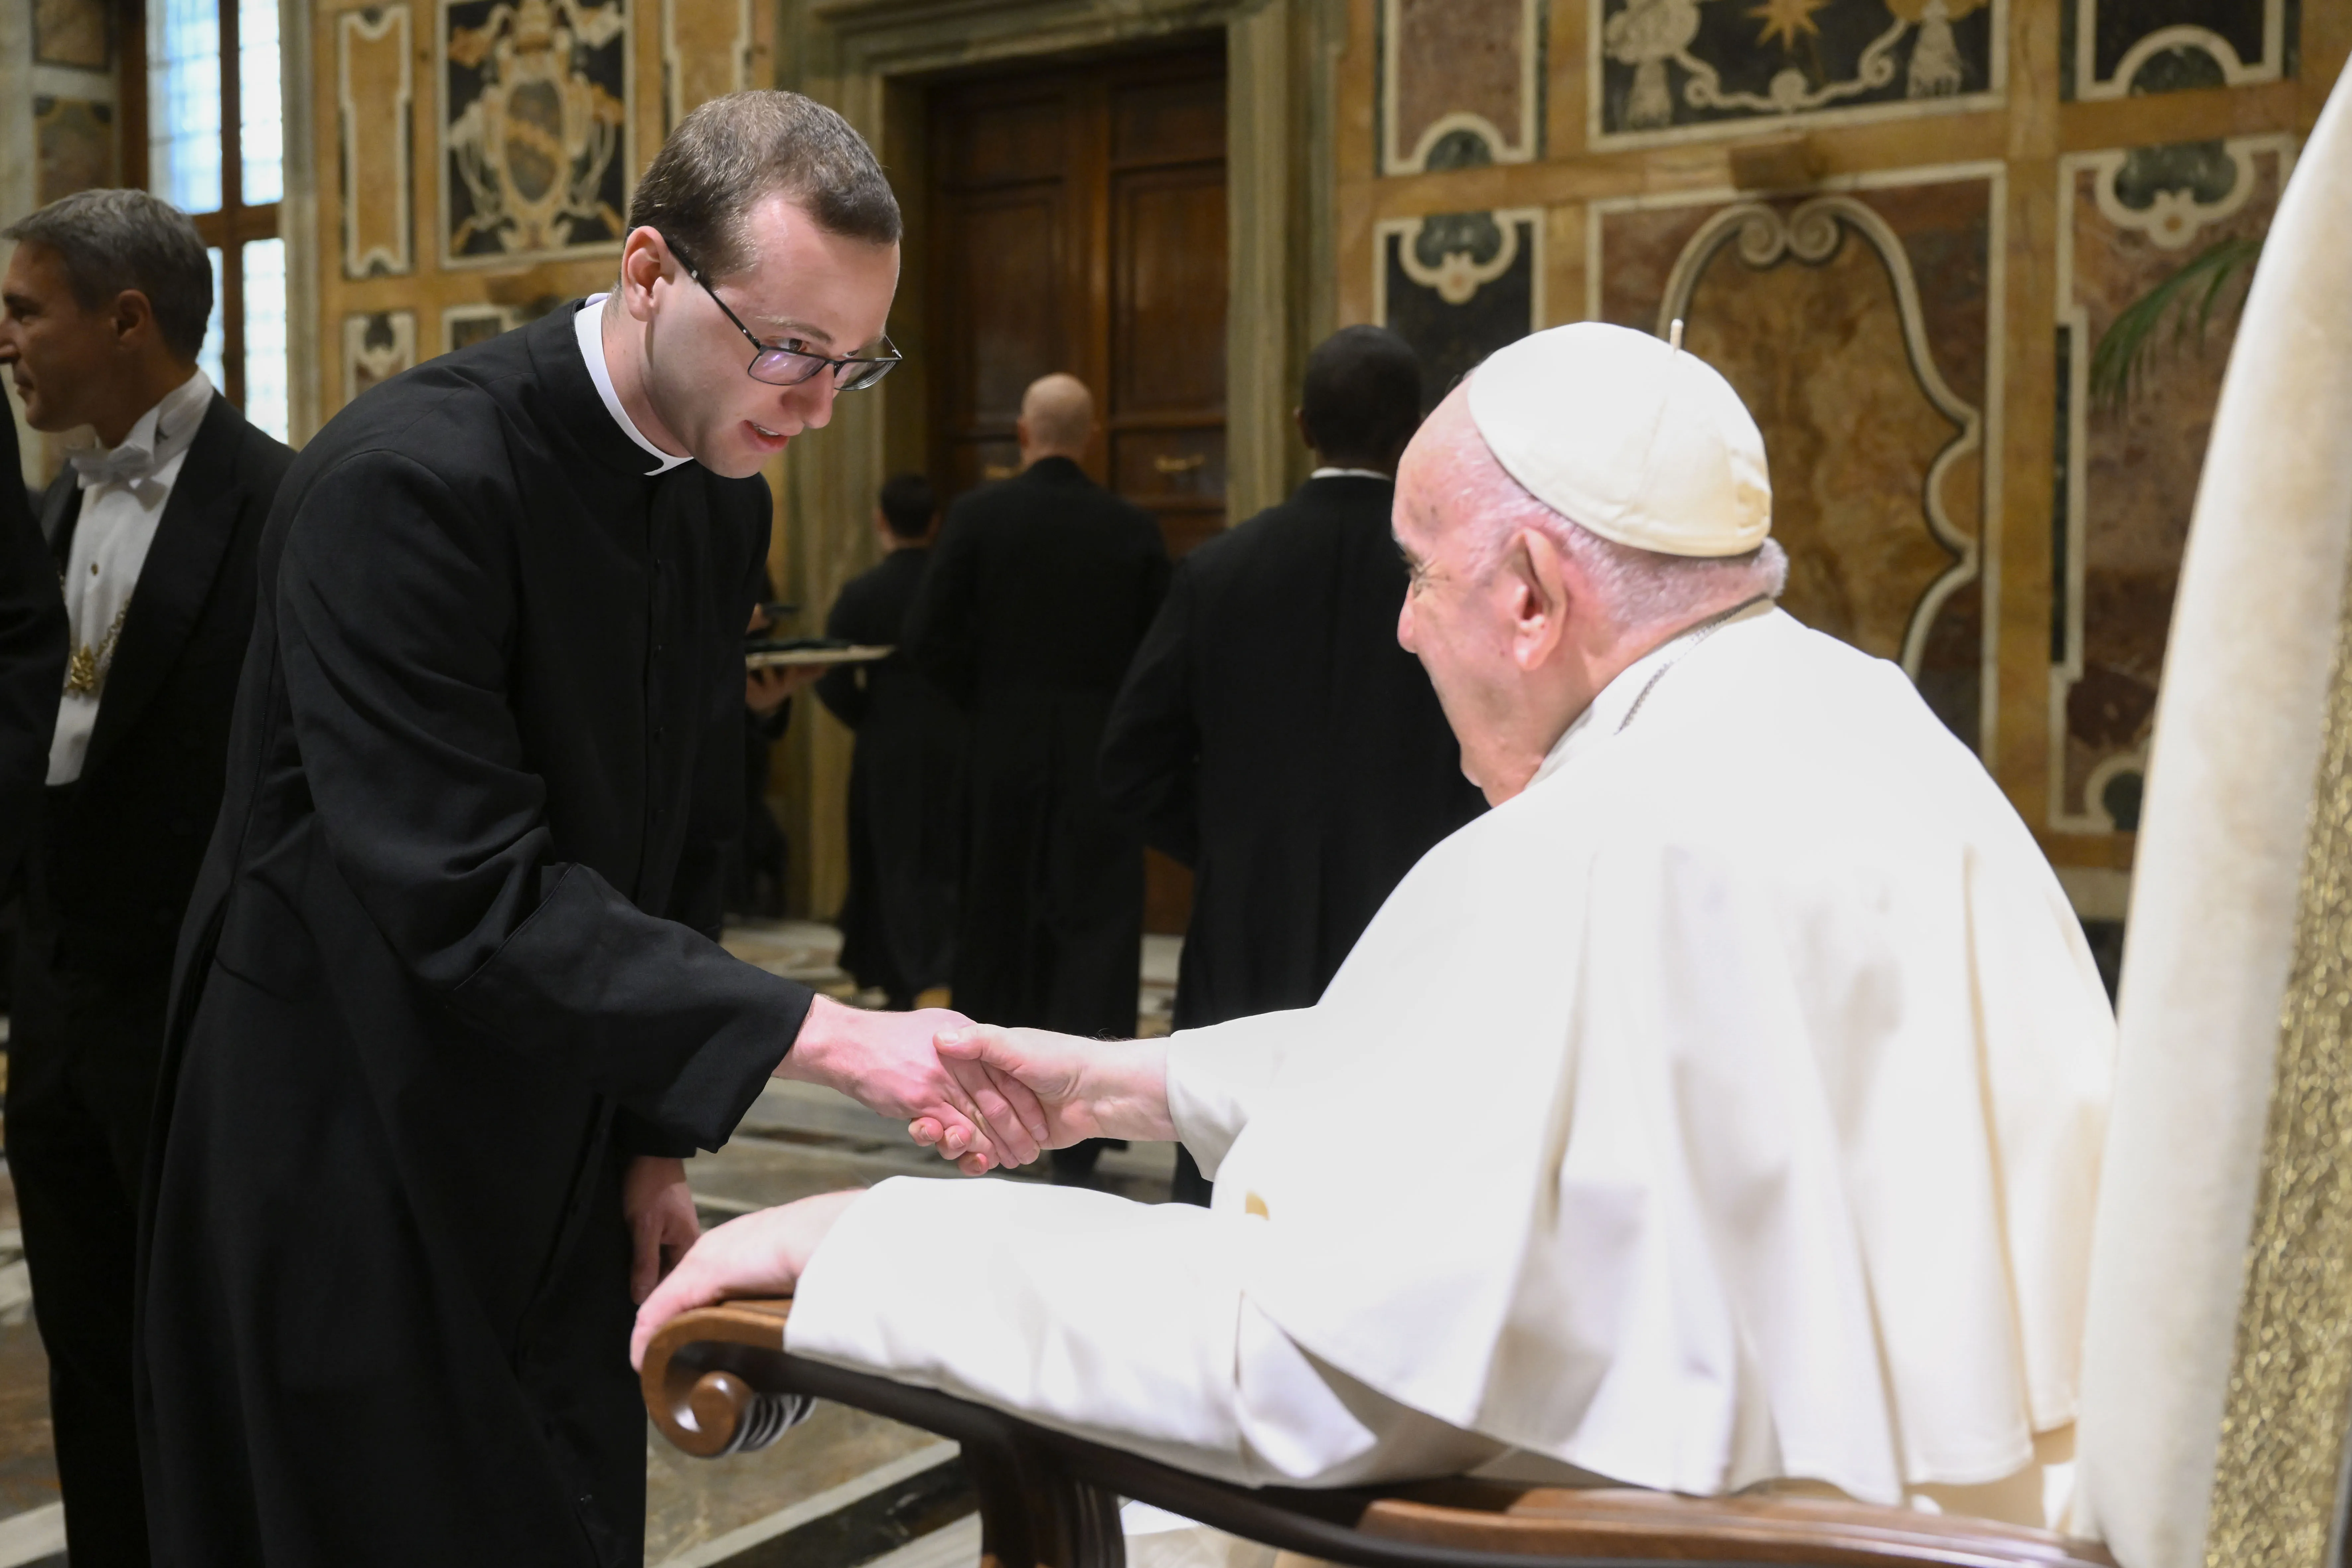 Pope Francis met with seminarians, staff, and faculty of the Ponitifical North American College in the Vatican's Apostolic Palace on Jan. 14, 2023.?w=200&h=150